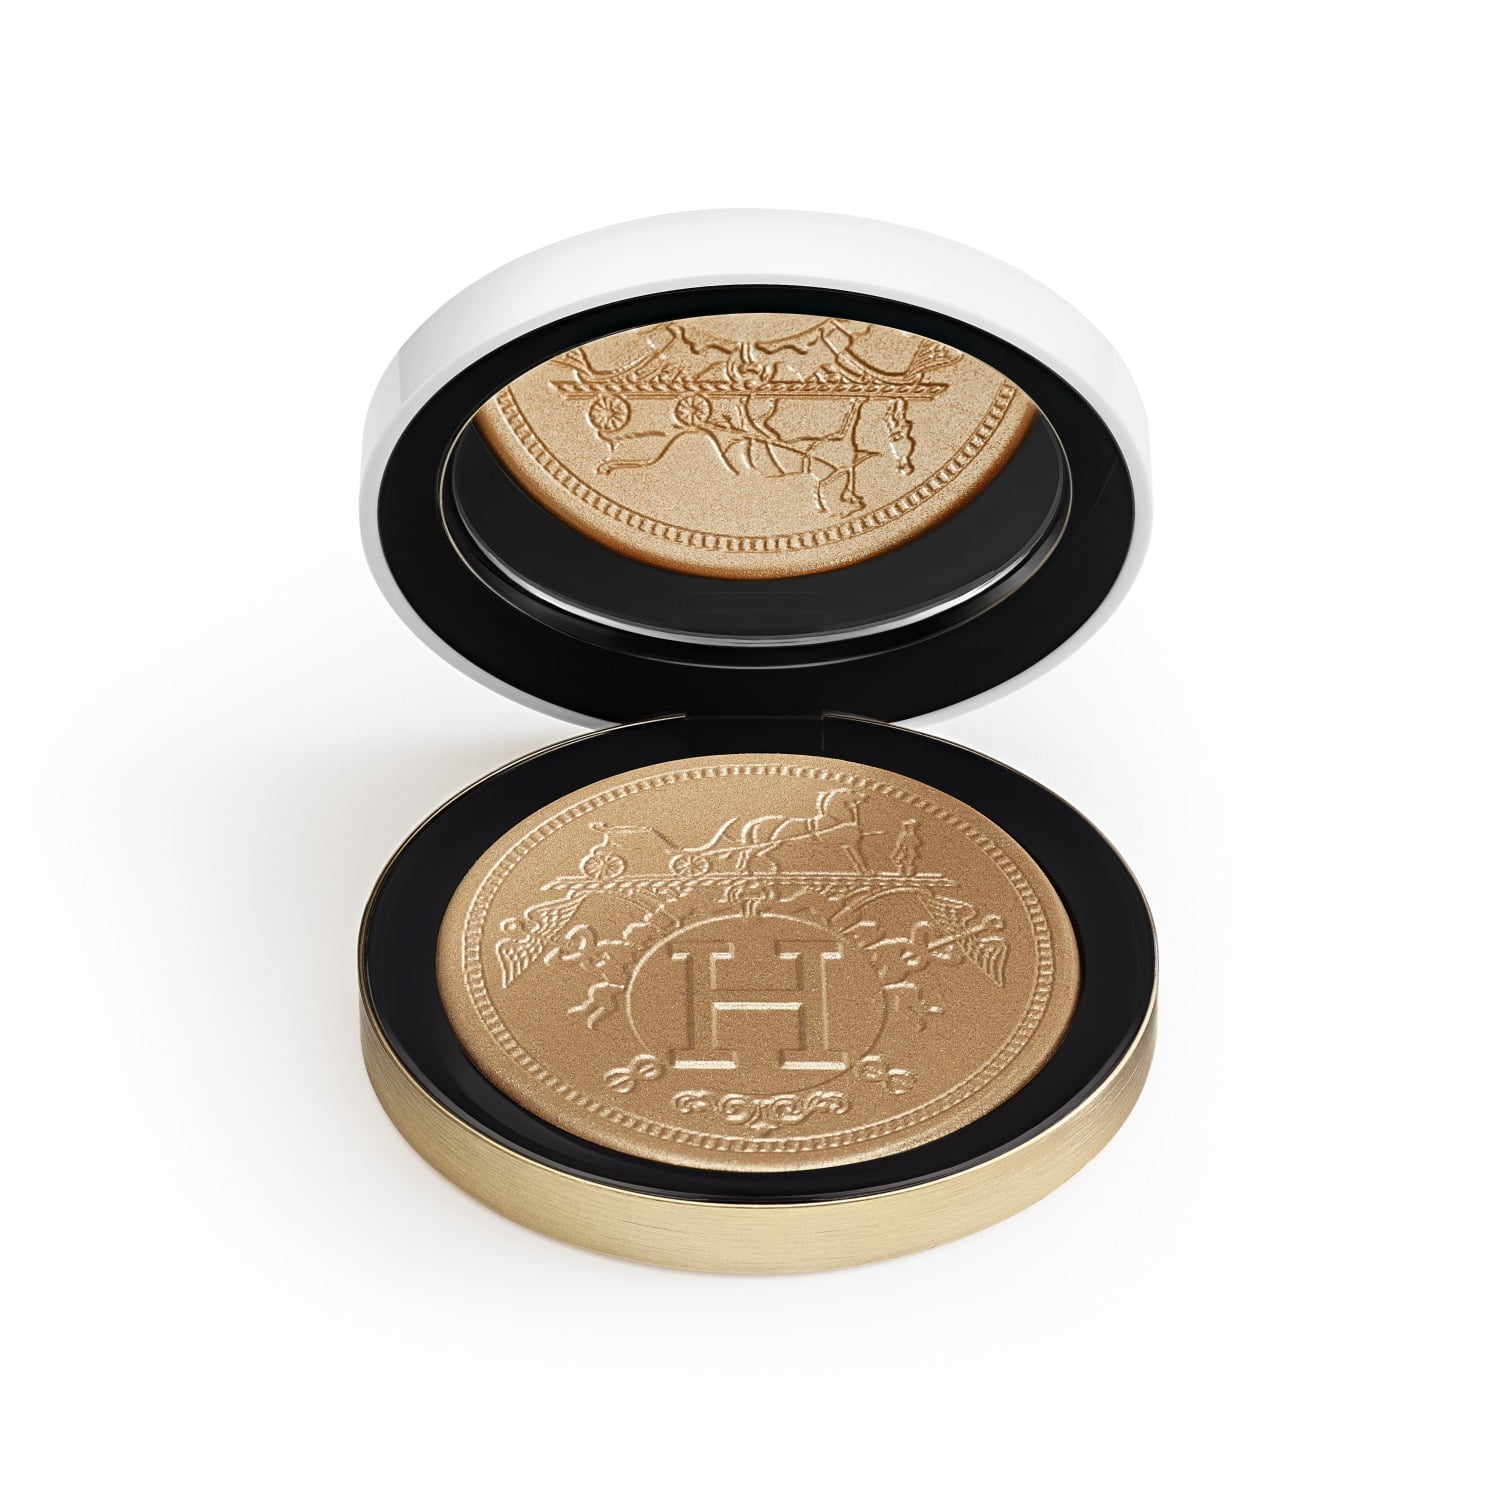 HERMÈS 2021 Fall/Winter Limited Edition face and eye powder